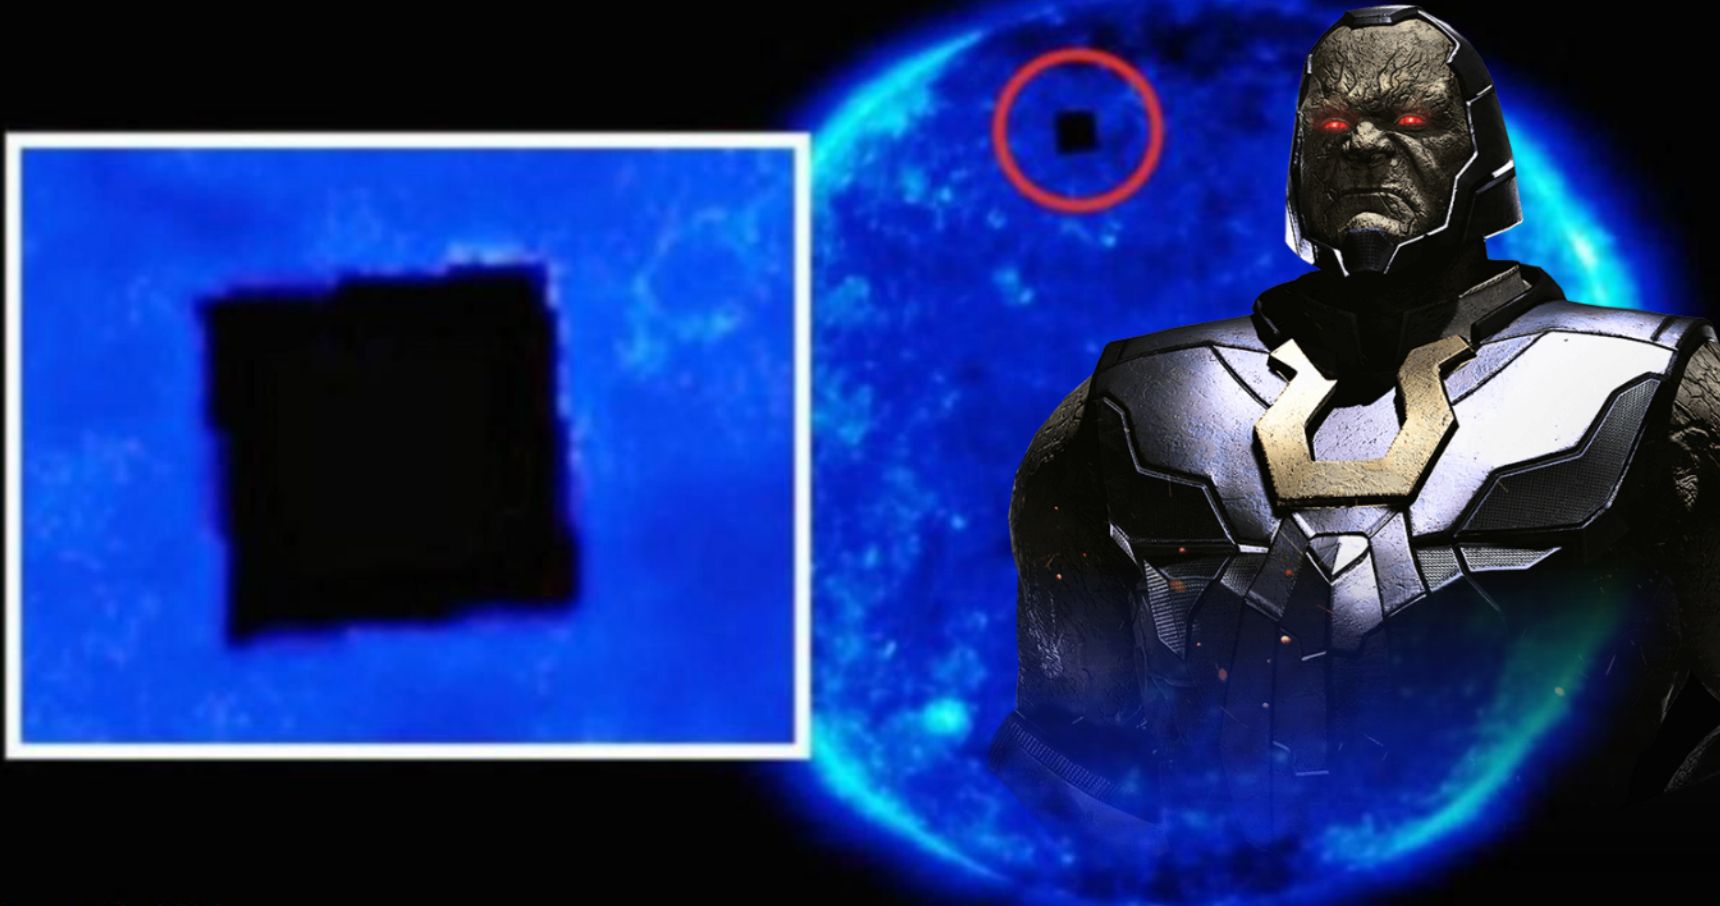 Alien Cube Sightings Get a Great Reaction from Justice League Darkseid Actor